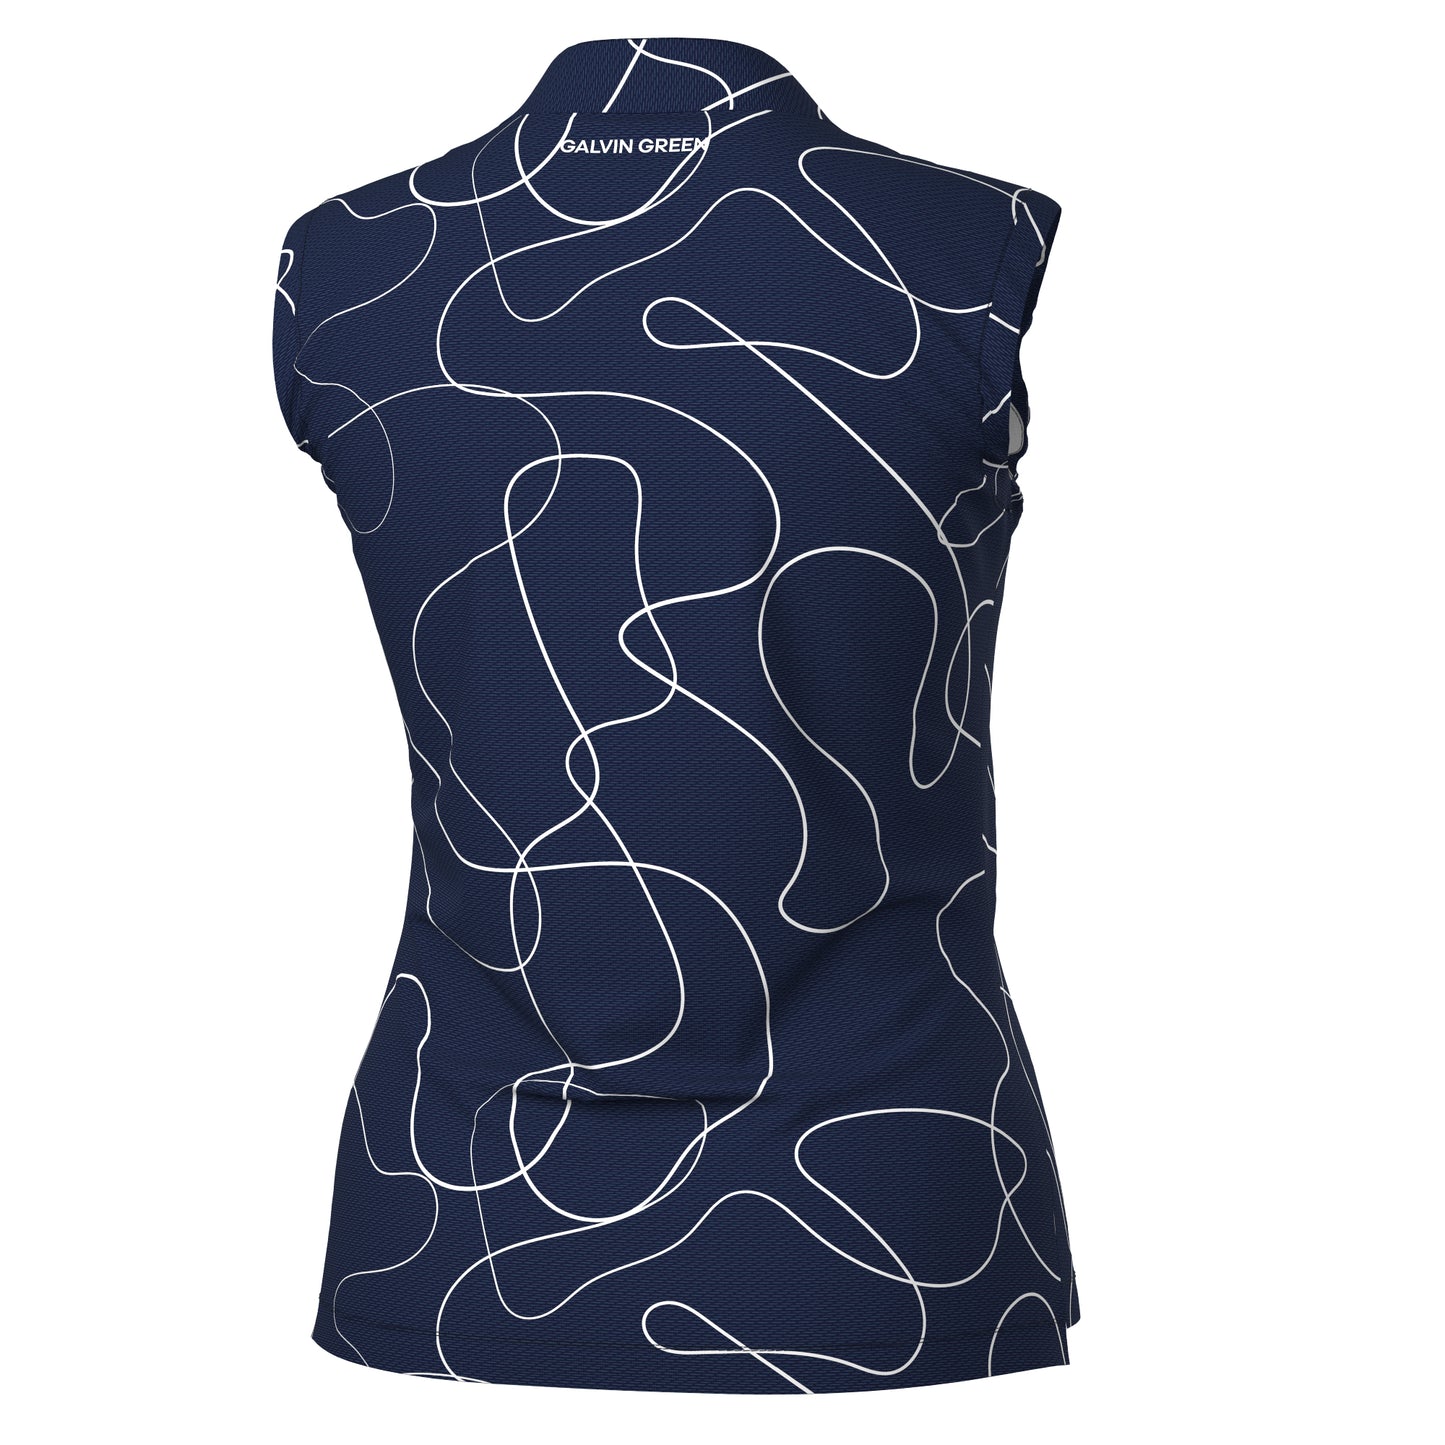 Galvin Green Ladies VENTIL8 PLUS Sleeveless Polo with Swirling Ribbon Print in Navy